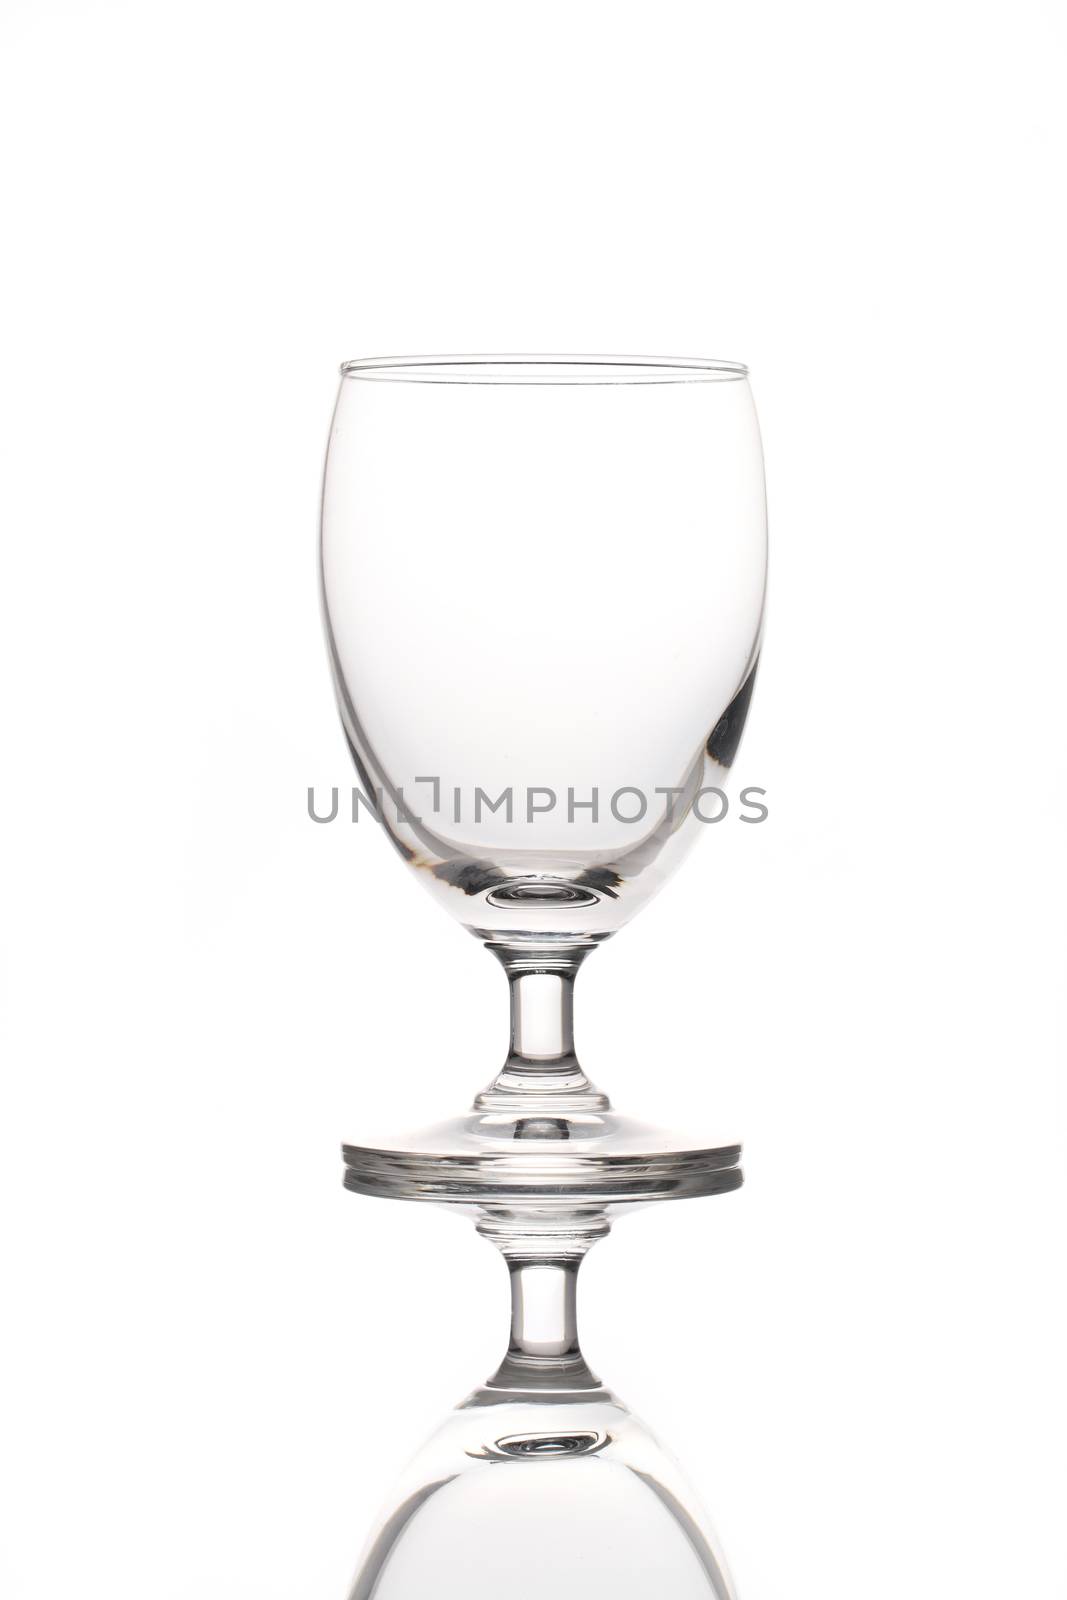 single empty wine glass isolated on the white background 